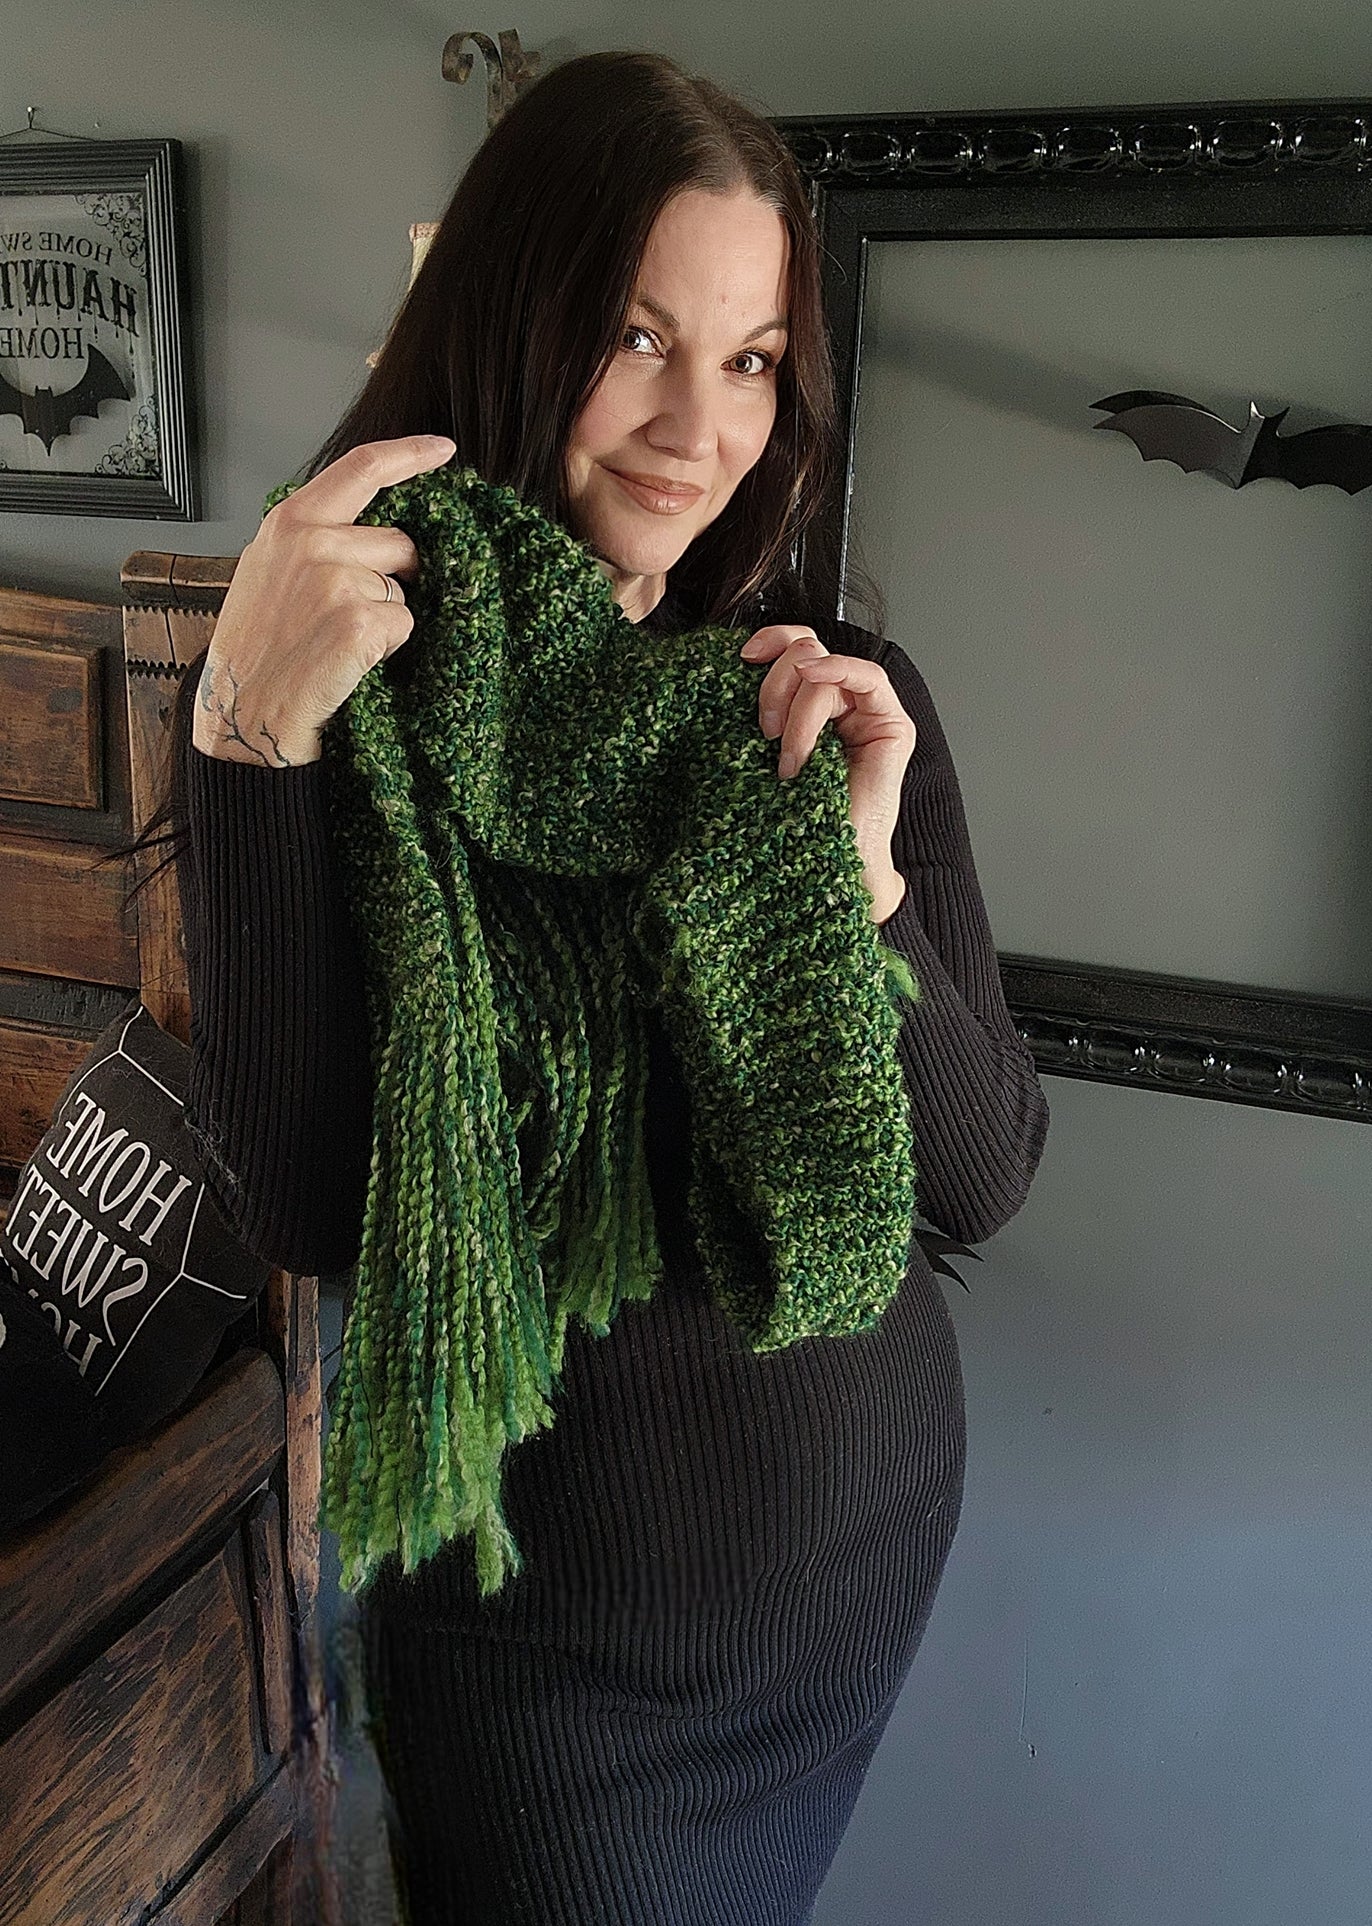 Emerald Isle" Green HandKnit Extra Long Scarf With Fringe